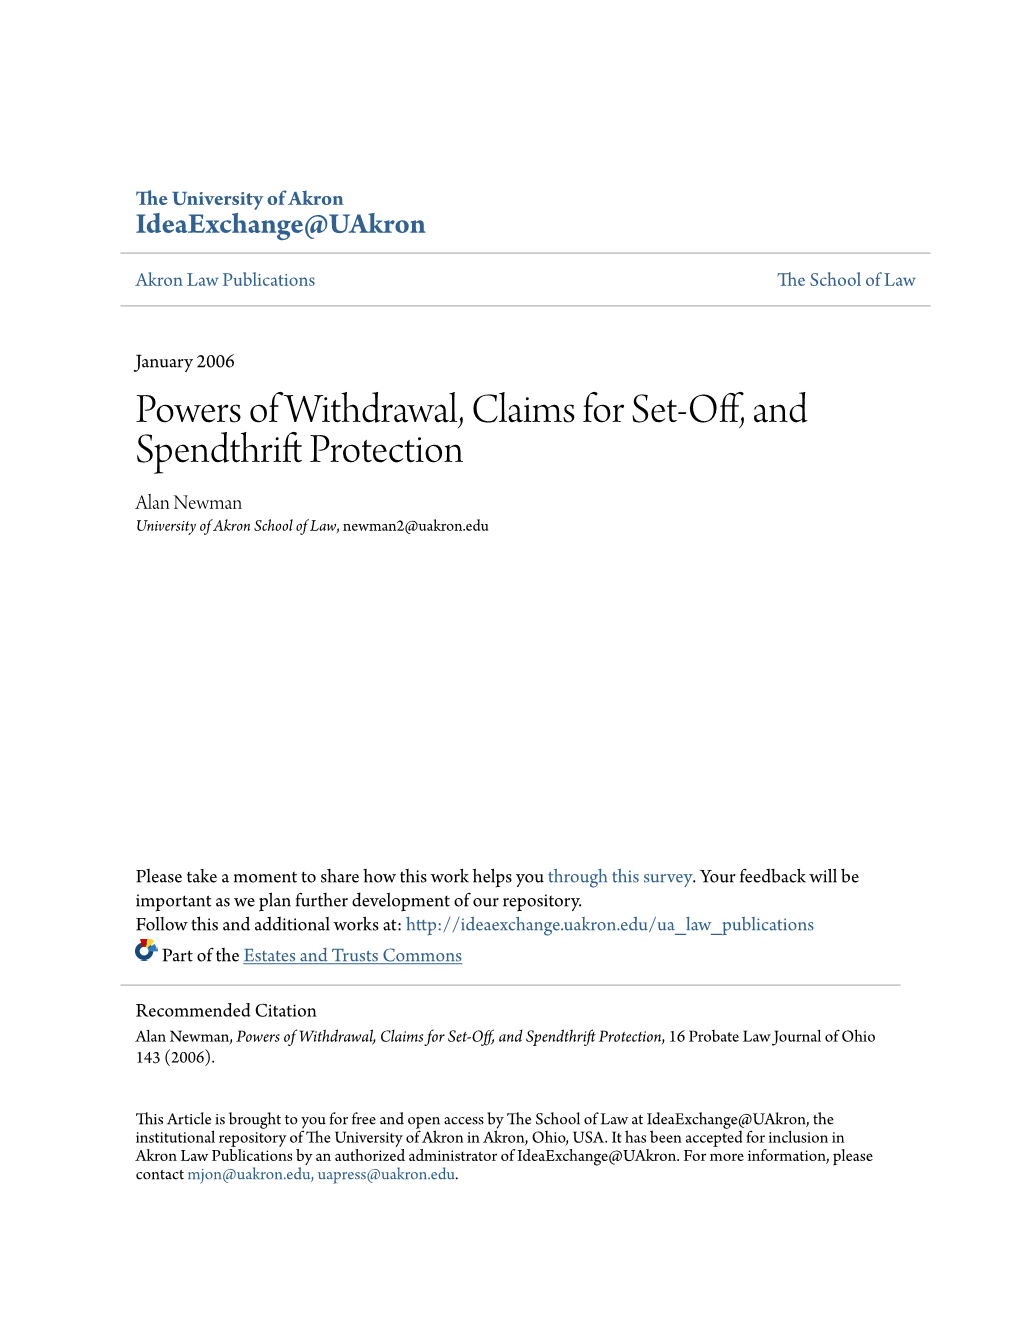 Powers of Withdrawal, Claims for Set-Off, and Spendthrift Protection